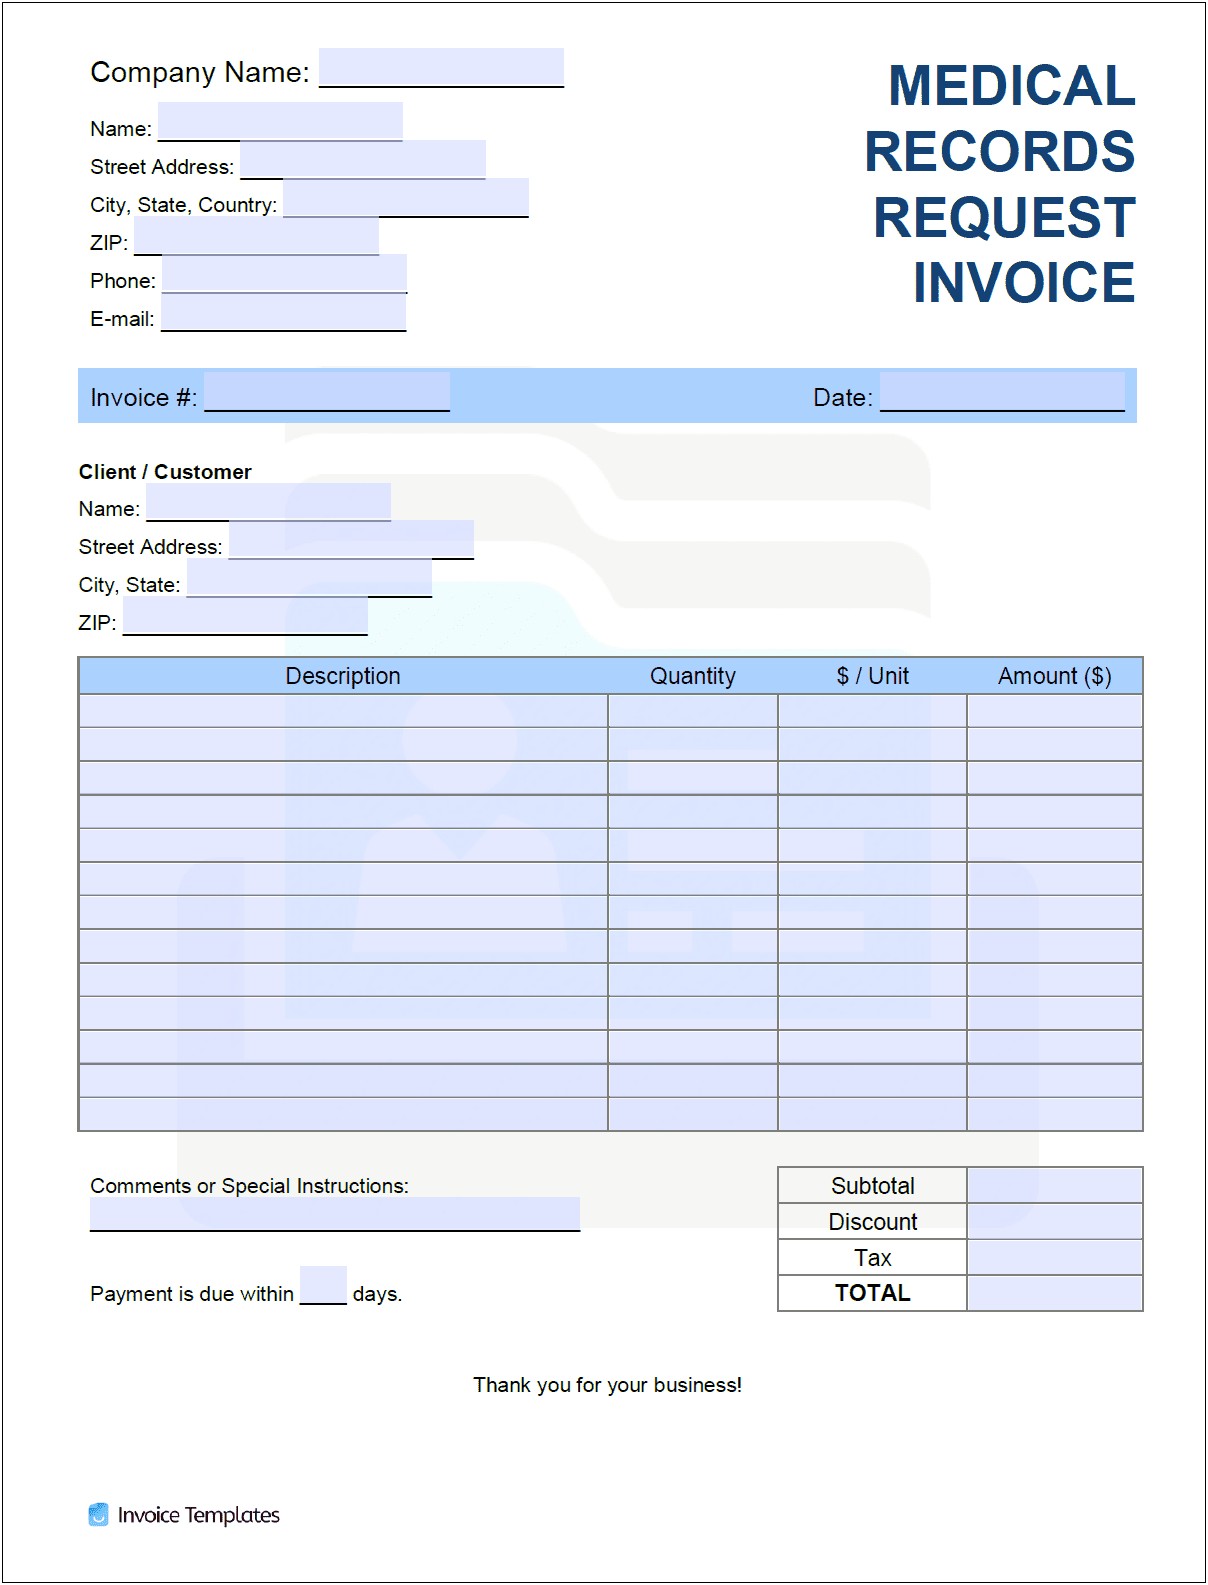 Word Template For Providing Medical Record To Patient